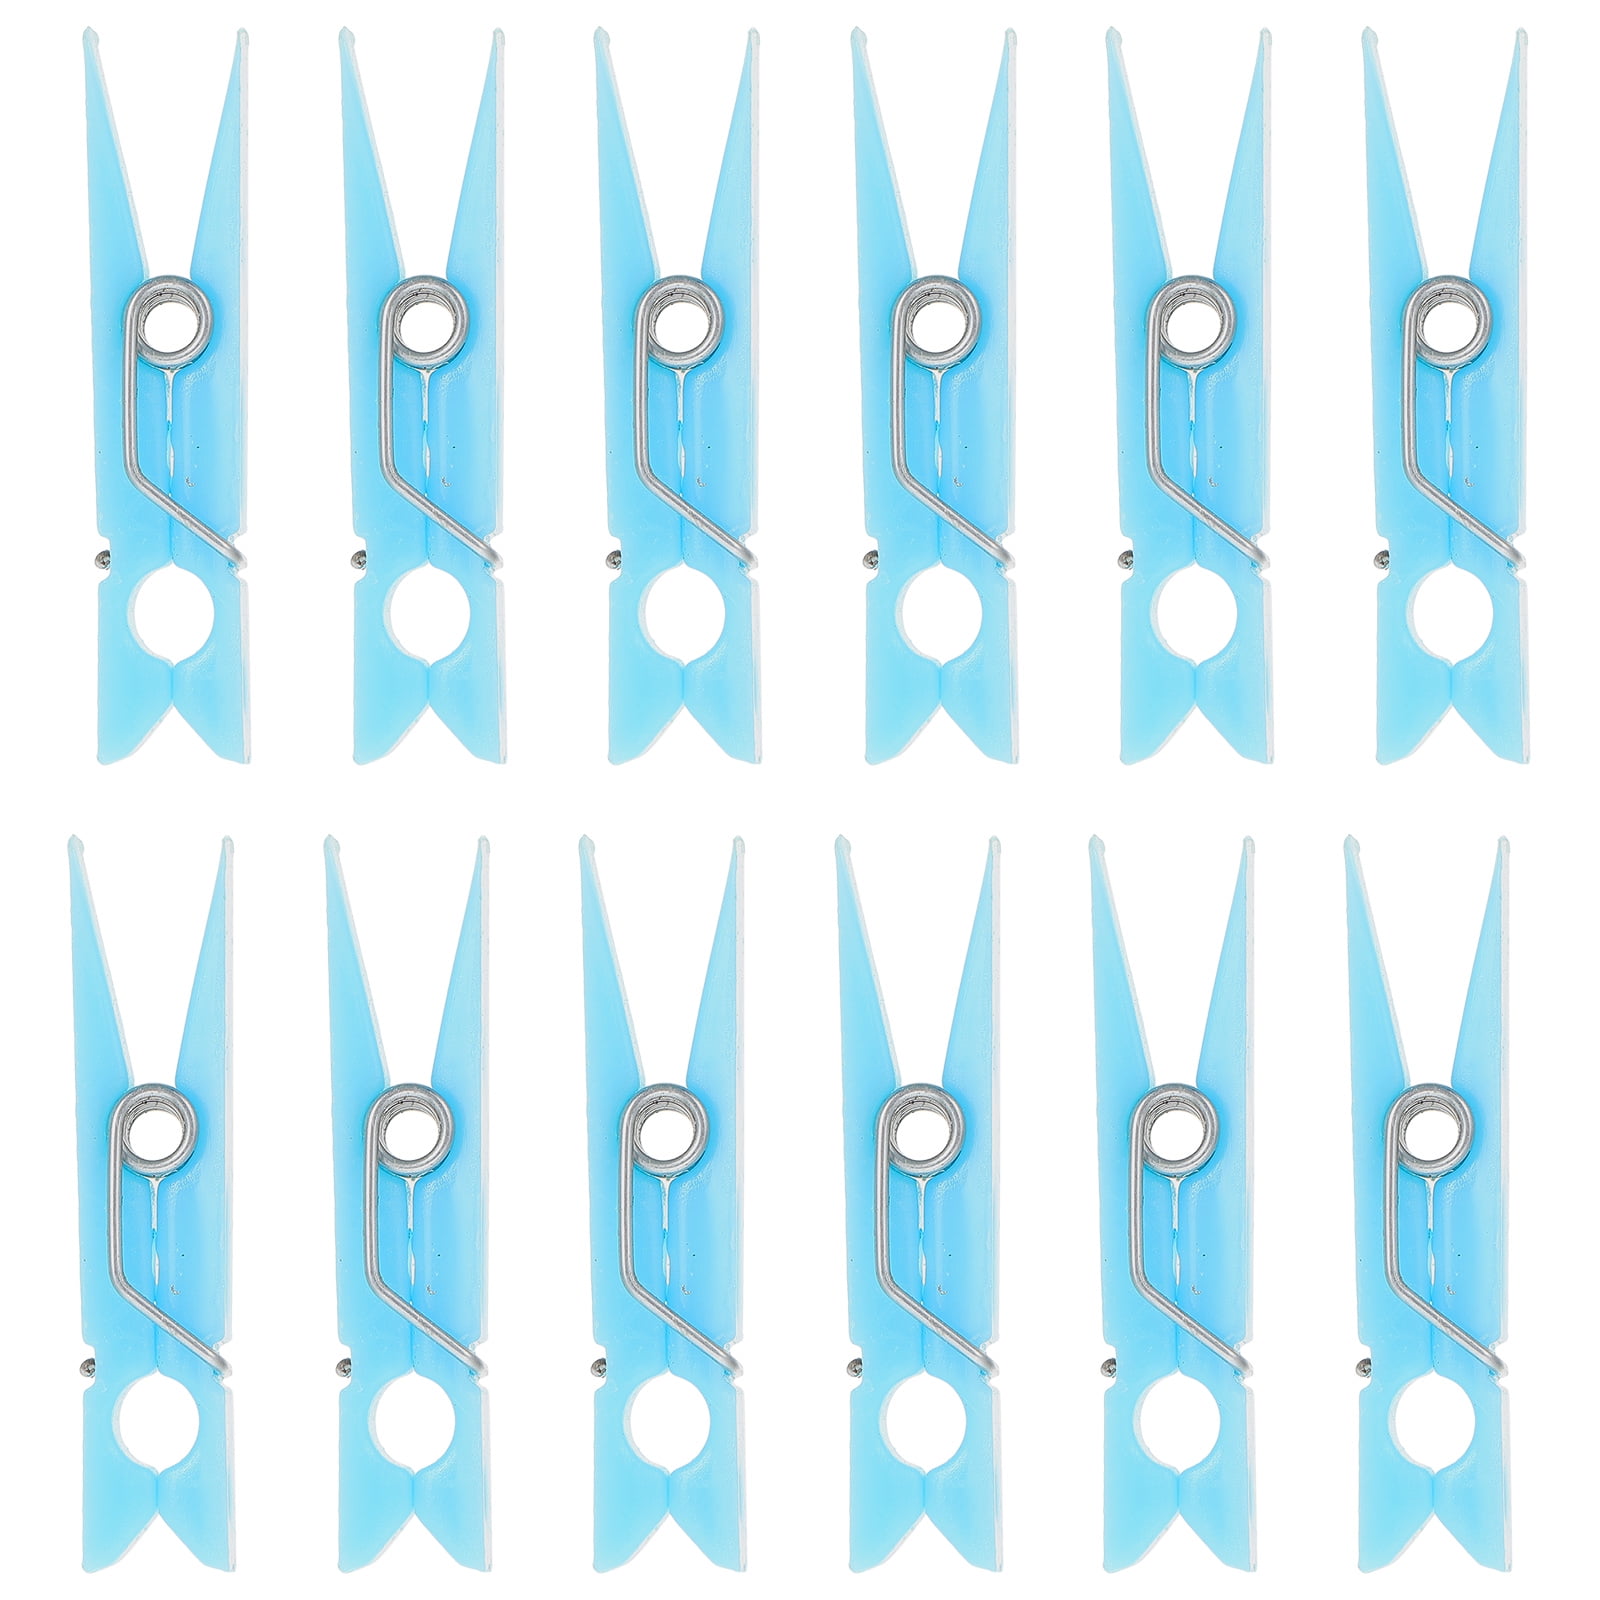 PINXOR 5 Packs Clothespins Gender Reveal Baby Shower Clothes Pin Baby Shower Party Favors, Infant Unisex, Size: 3.20